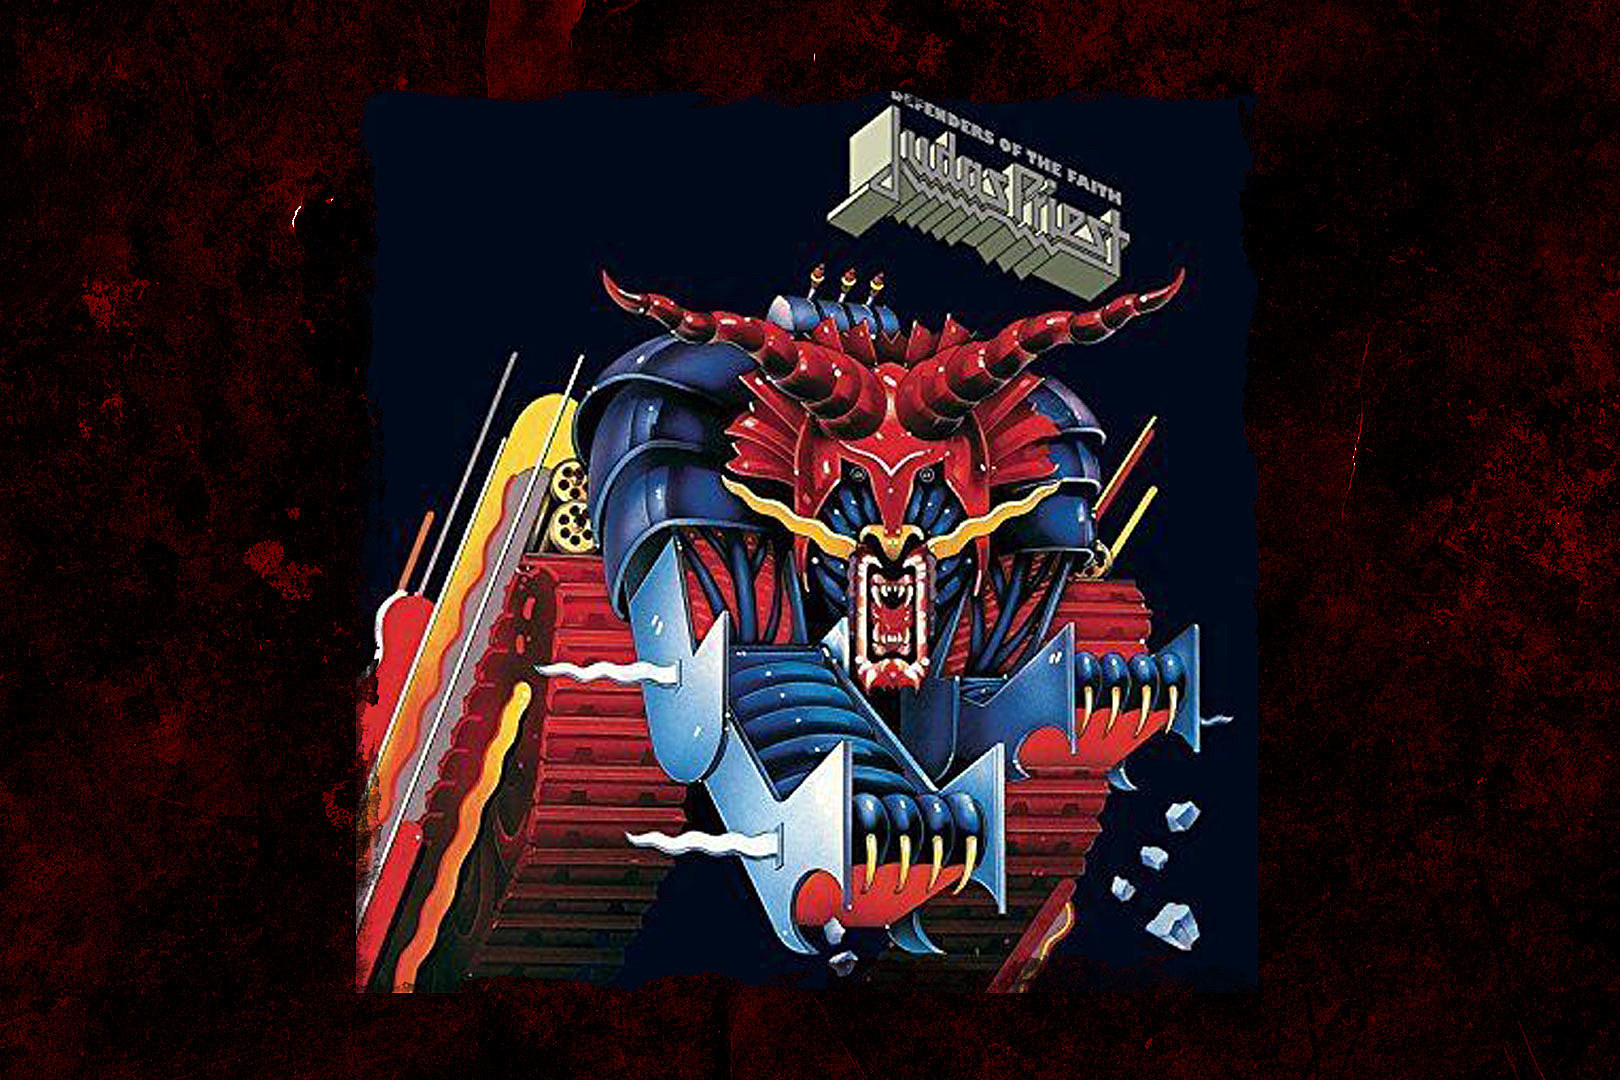 39 Years Ago: Judas Priest Release 'Defenders of the Faith'